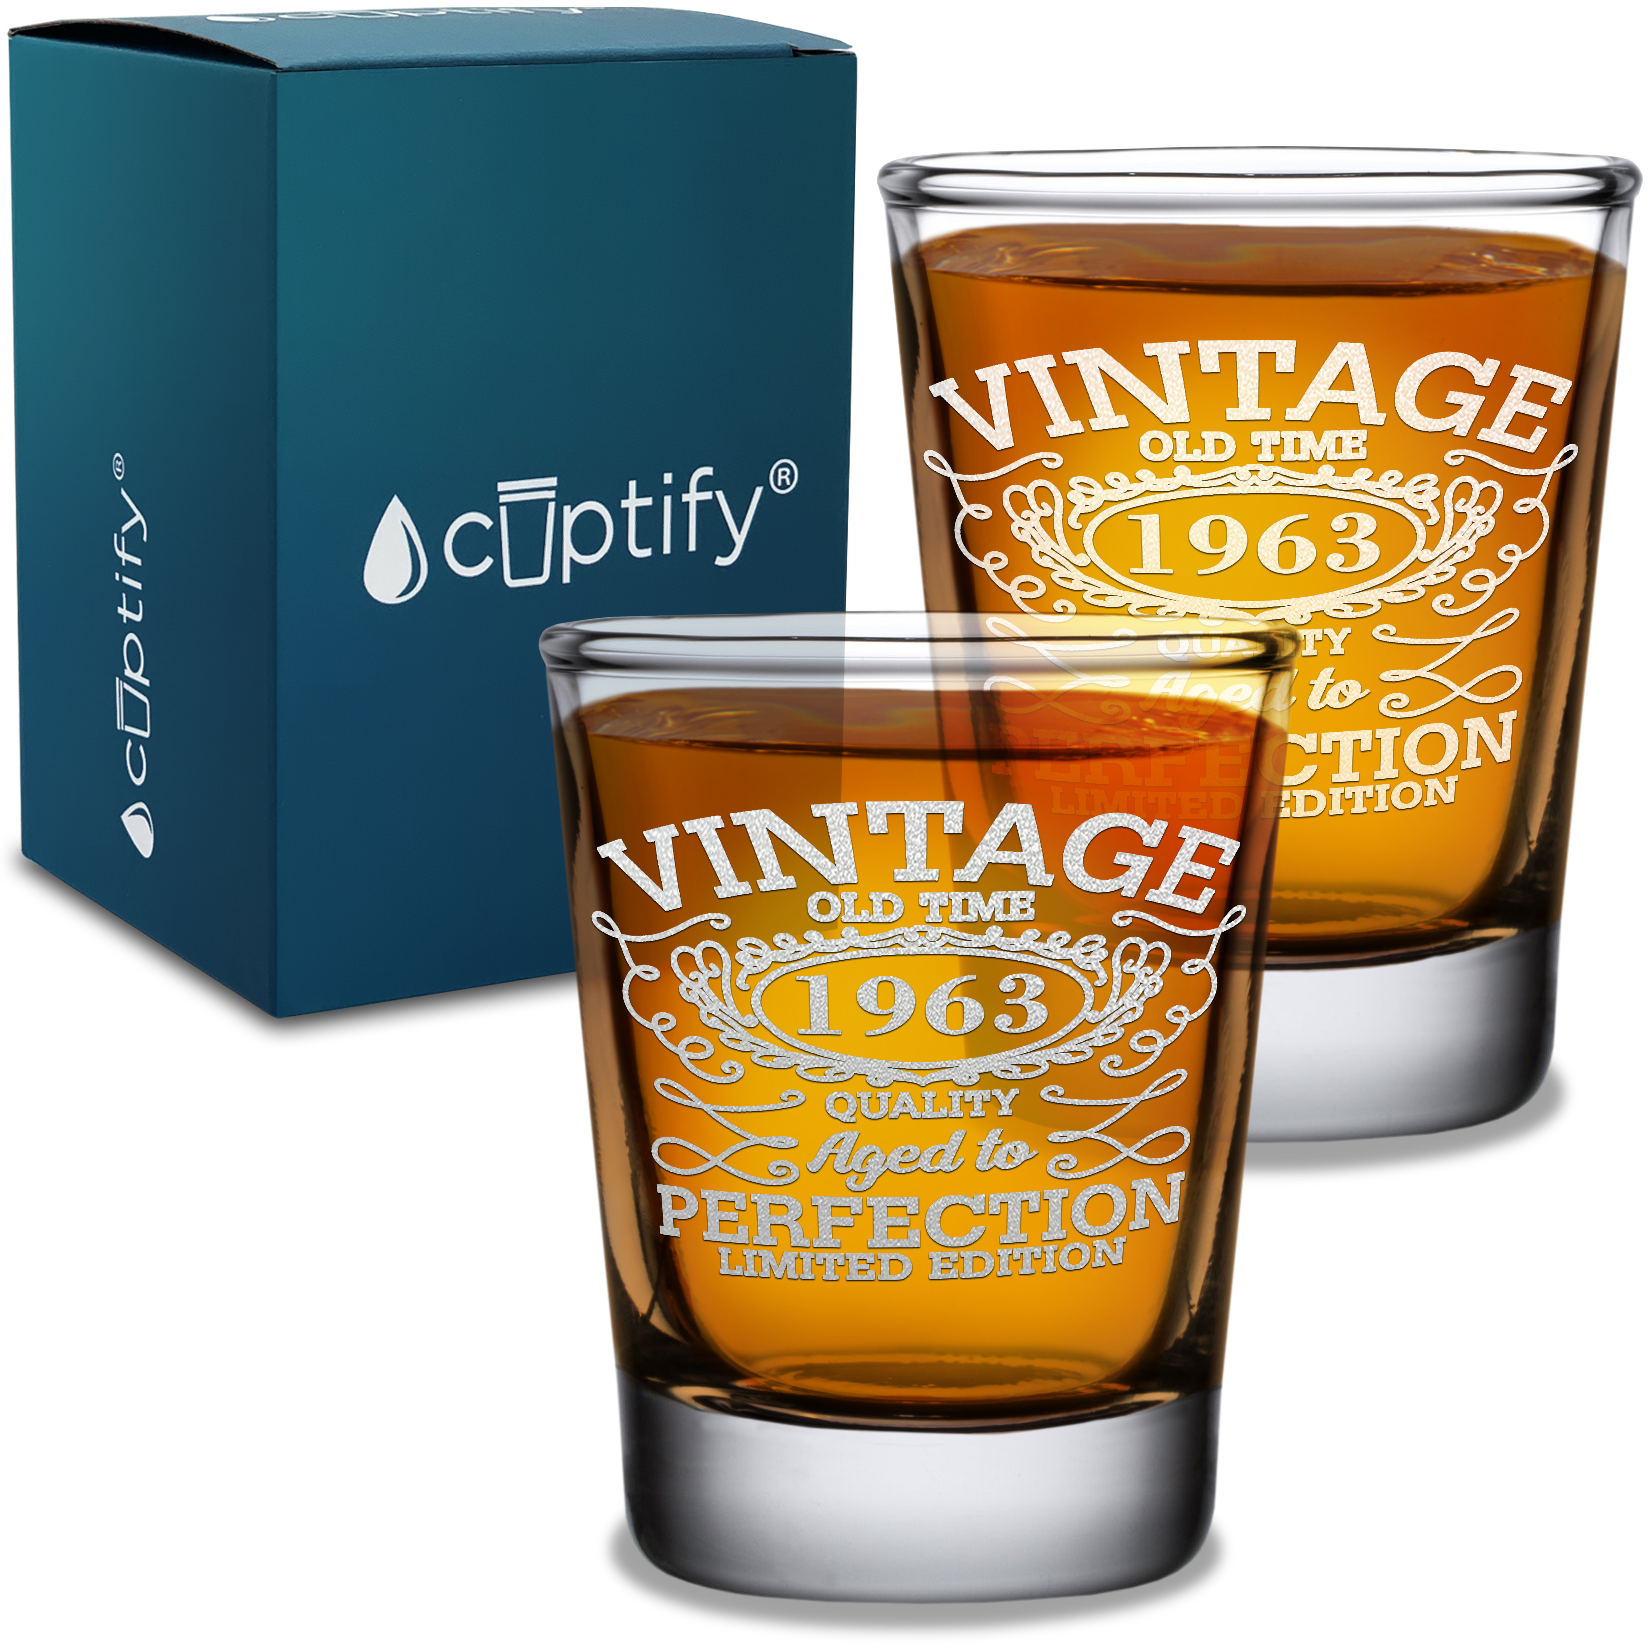 58th Birthday Vintage 58 Years Old Time 1963 Quality Laser Engraved 2oz Shot Glasses - Set of 2